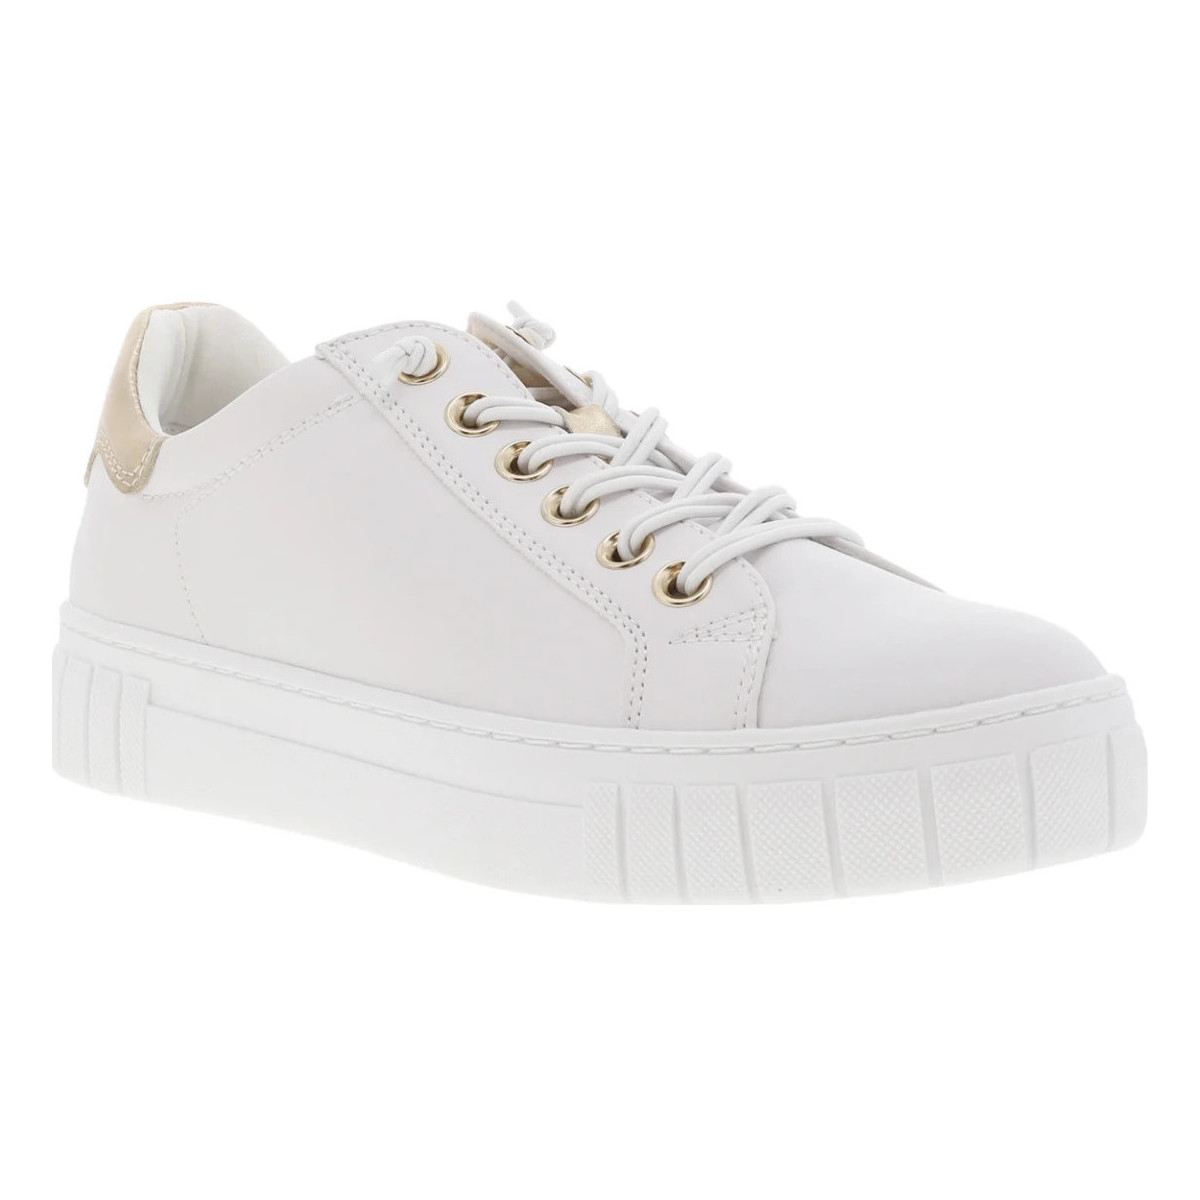 Chaussures Femme Baskets basses Marco Tozzi 19149CHPE23 Blanc